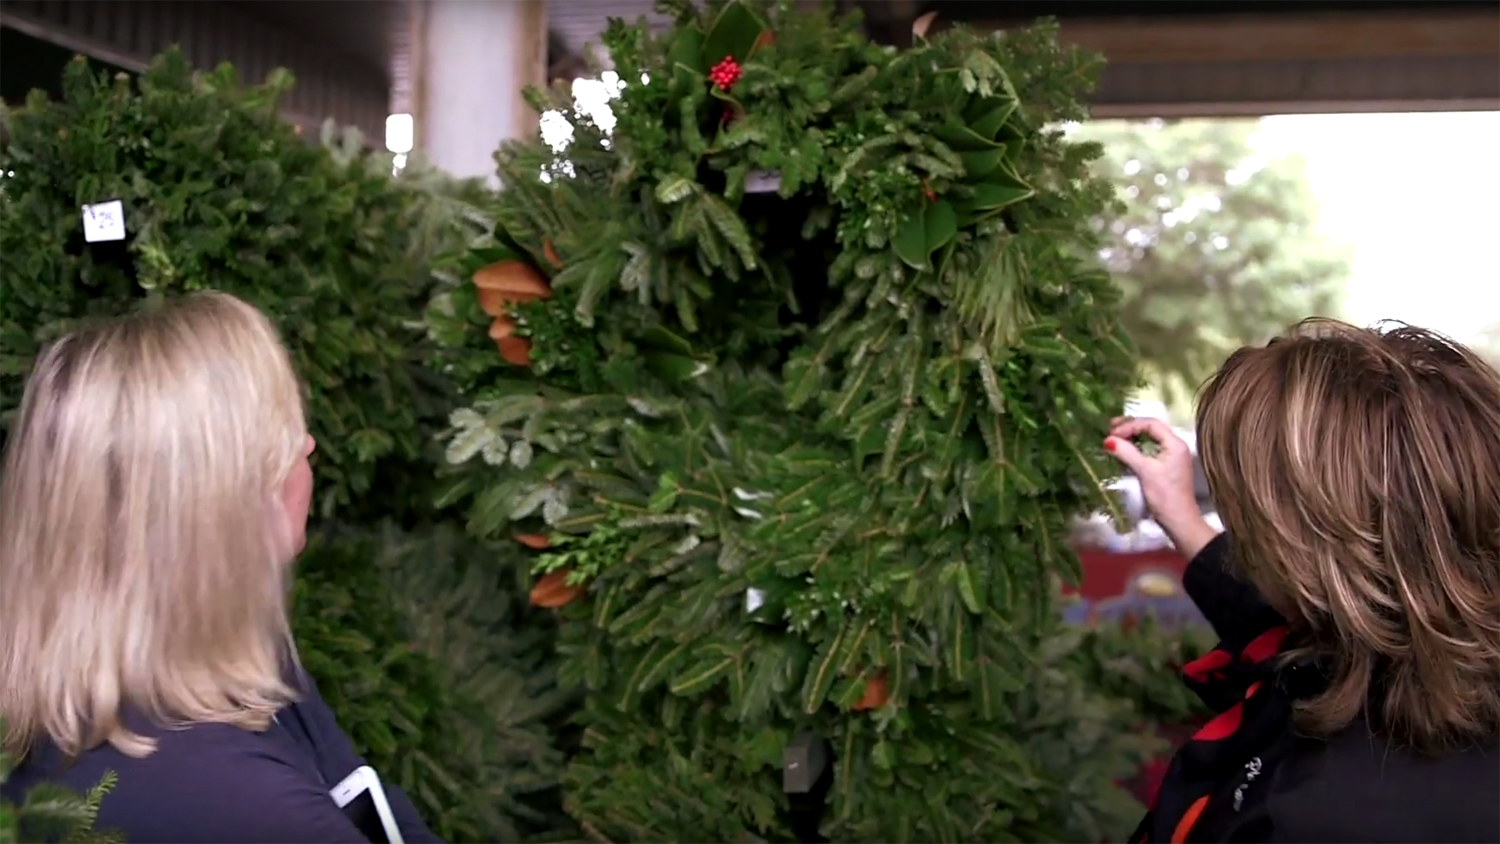 Two women looking at a green holiday wreath hanging on a rack.